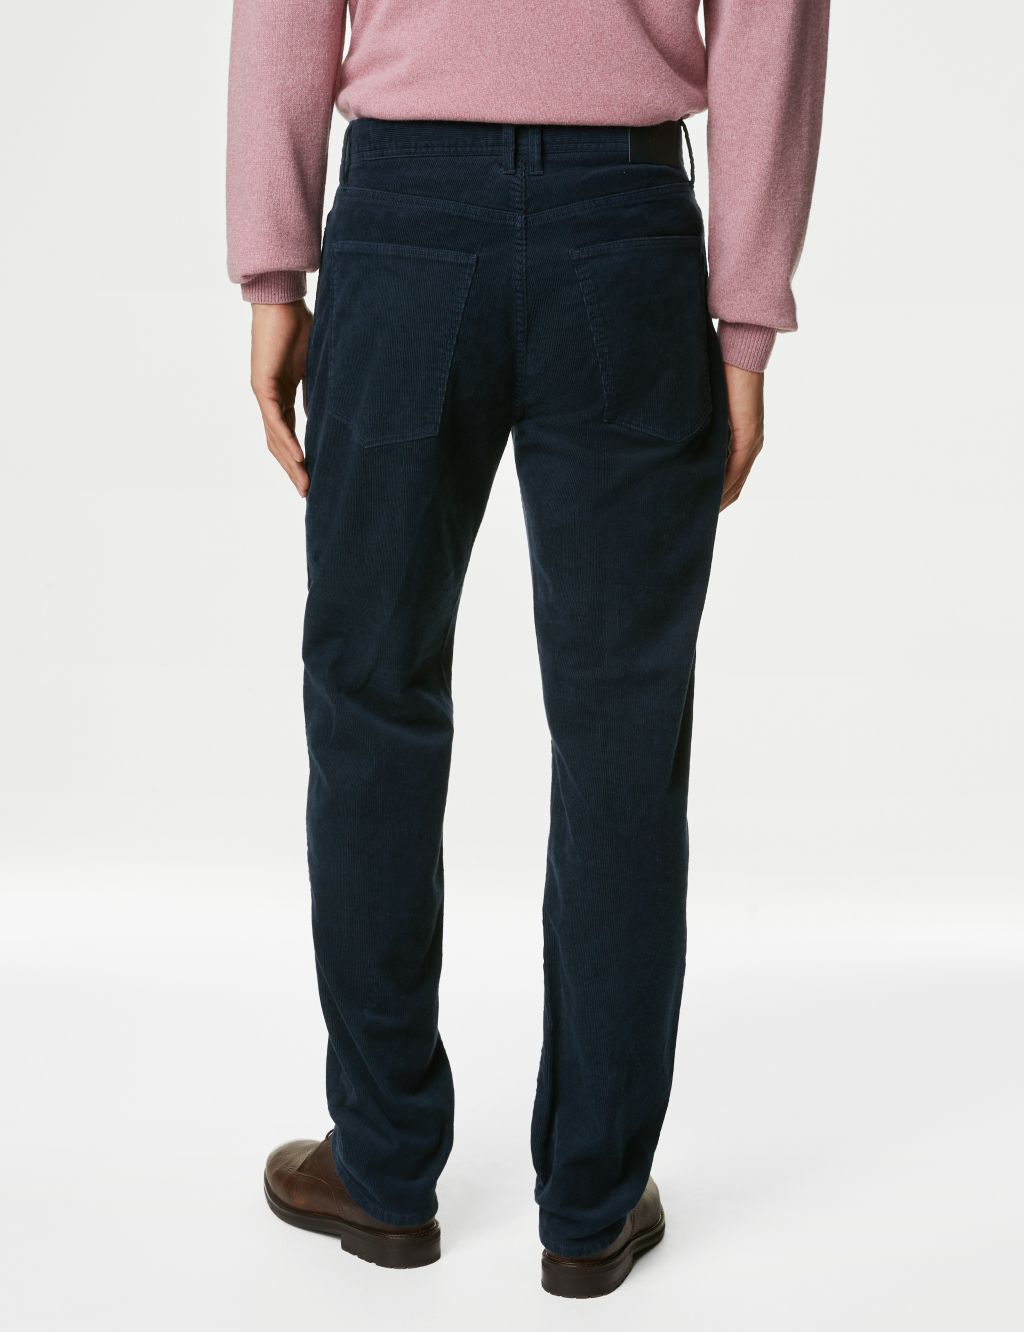 Straight Fit Corduroy 5 Pocket Trousers image 5